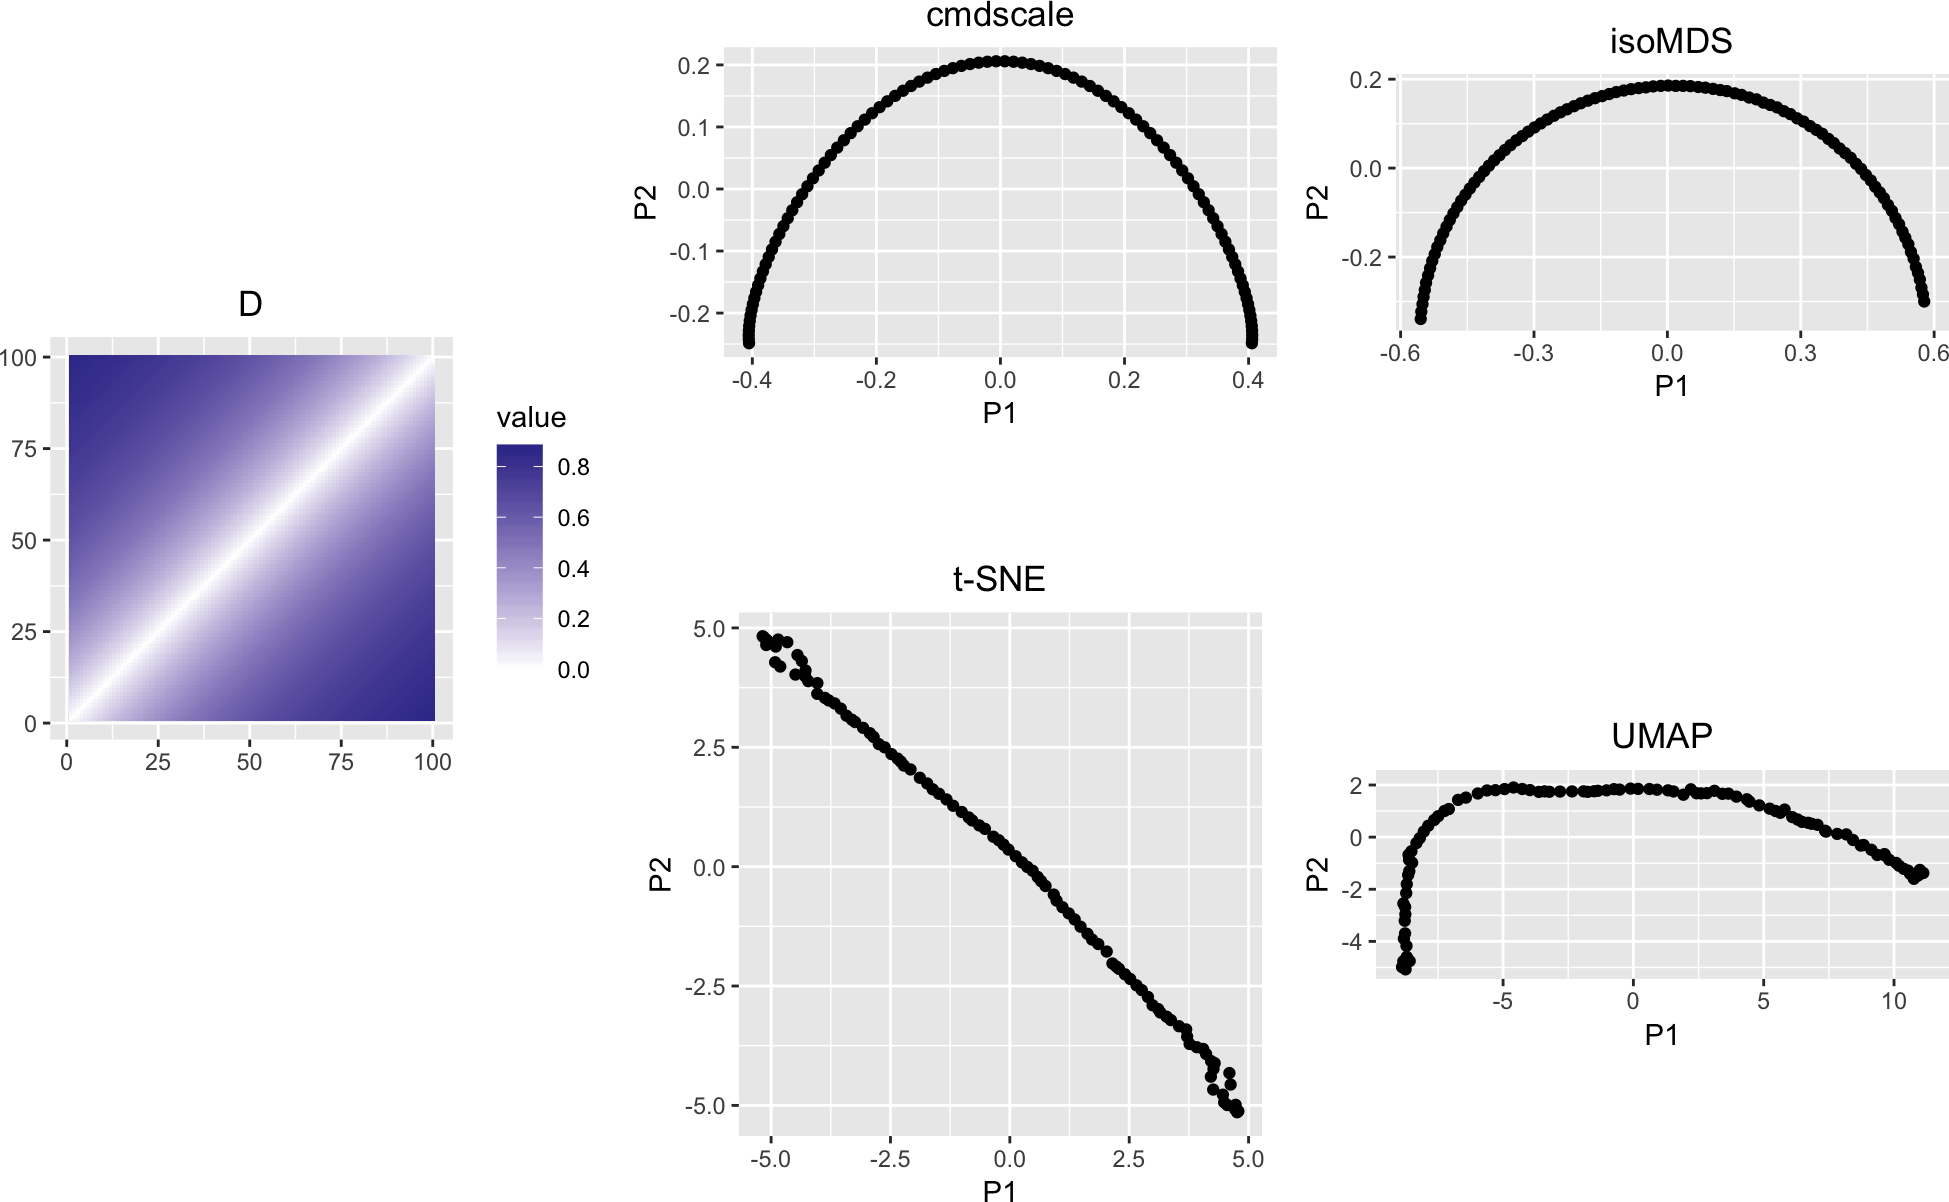 The matrix D and various types of multidimensional scaling. Classical (linear) multidimensional scaling, `cmdscale`, and Kruskal's non-metric nultidimensional scaling, `isoMDS`, introduce an apparent curvature, or horseshoe shape, even though the matrix $D$ has a simple band-diagonal structure. Also shown are t-SNE and UMAP.